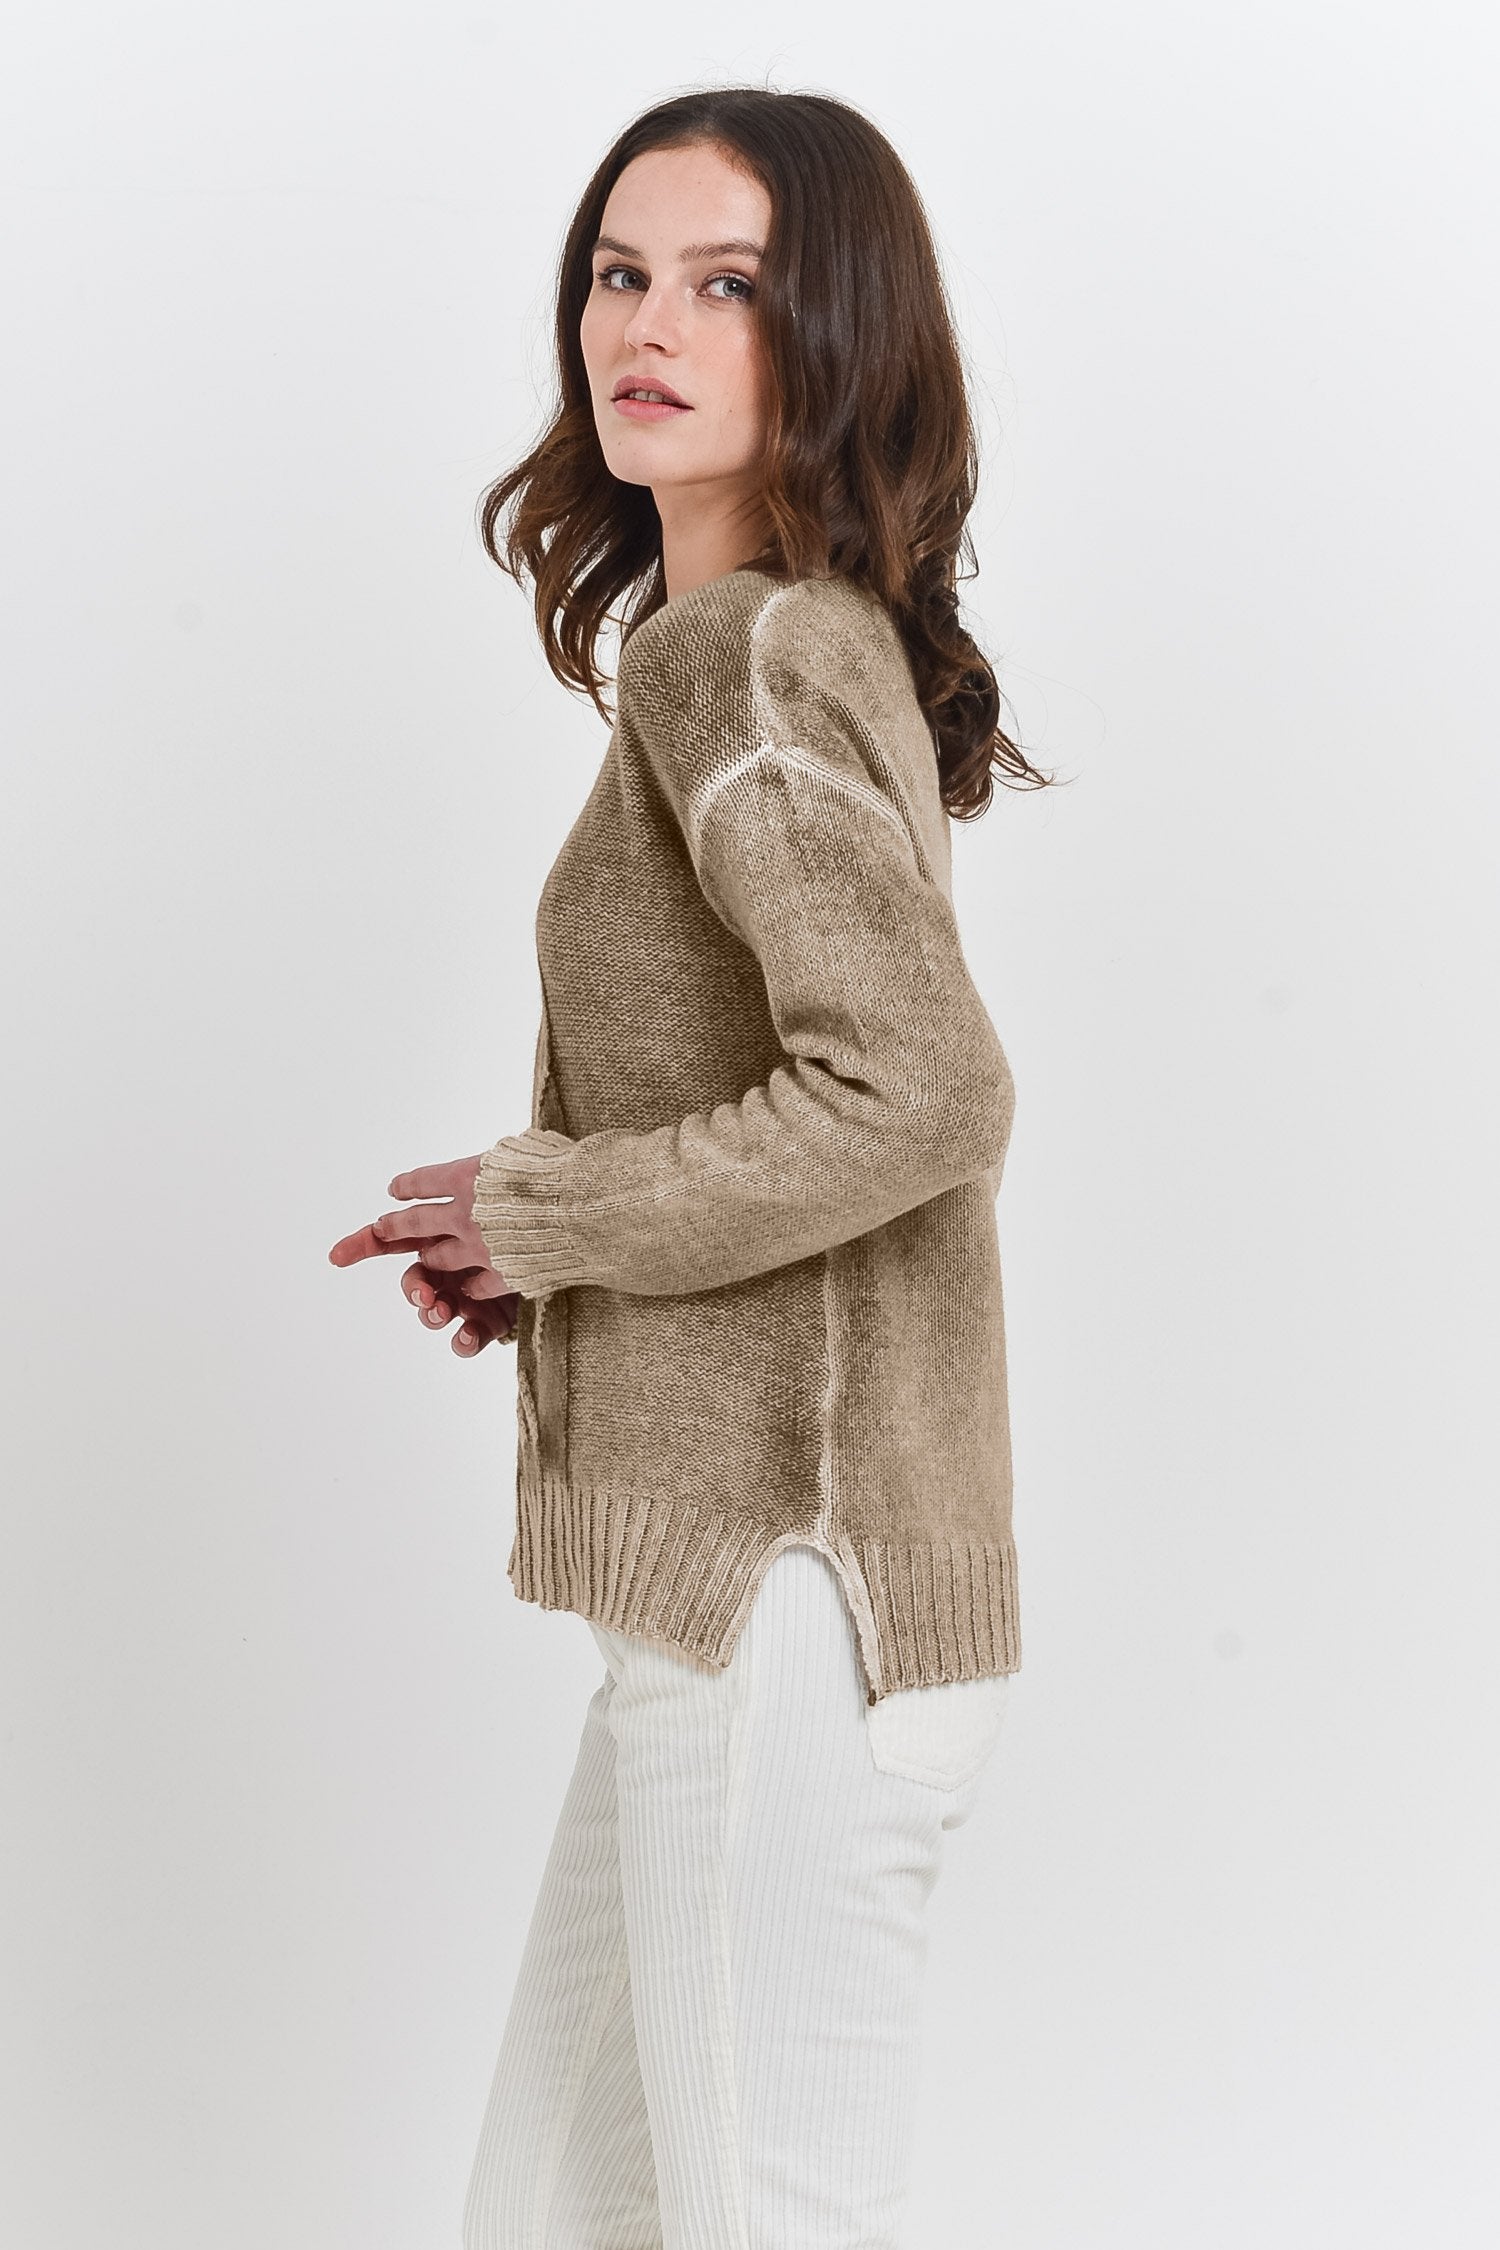 Copse Wood Spray Painted - Comfy Cable Sweater - Sweaters